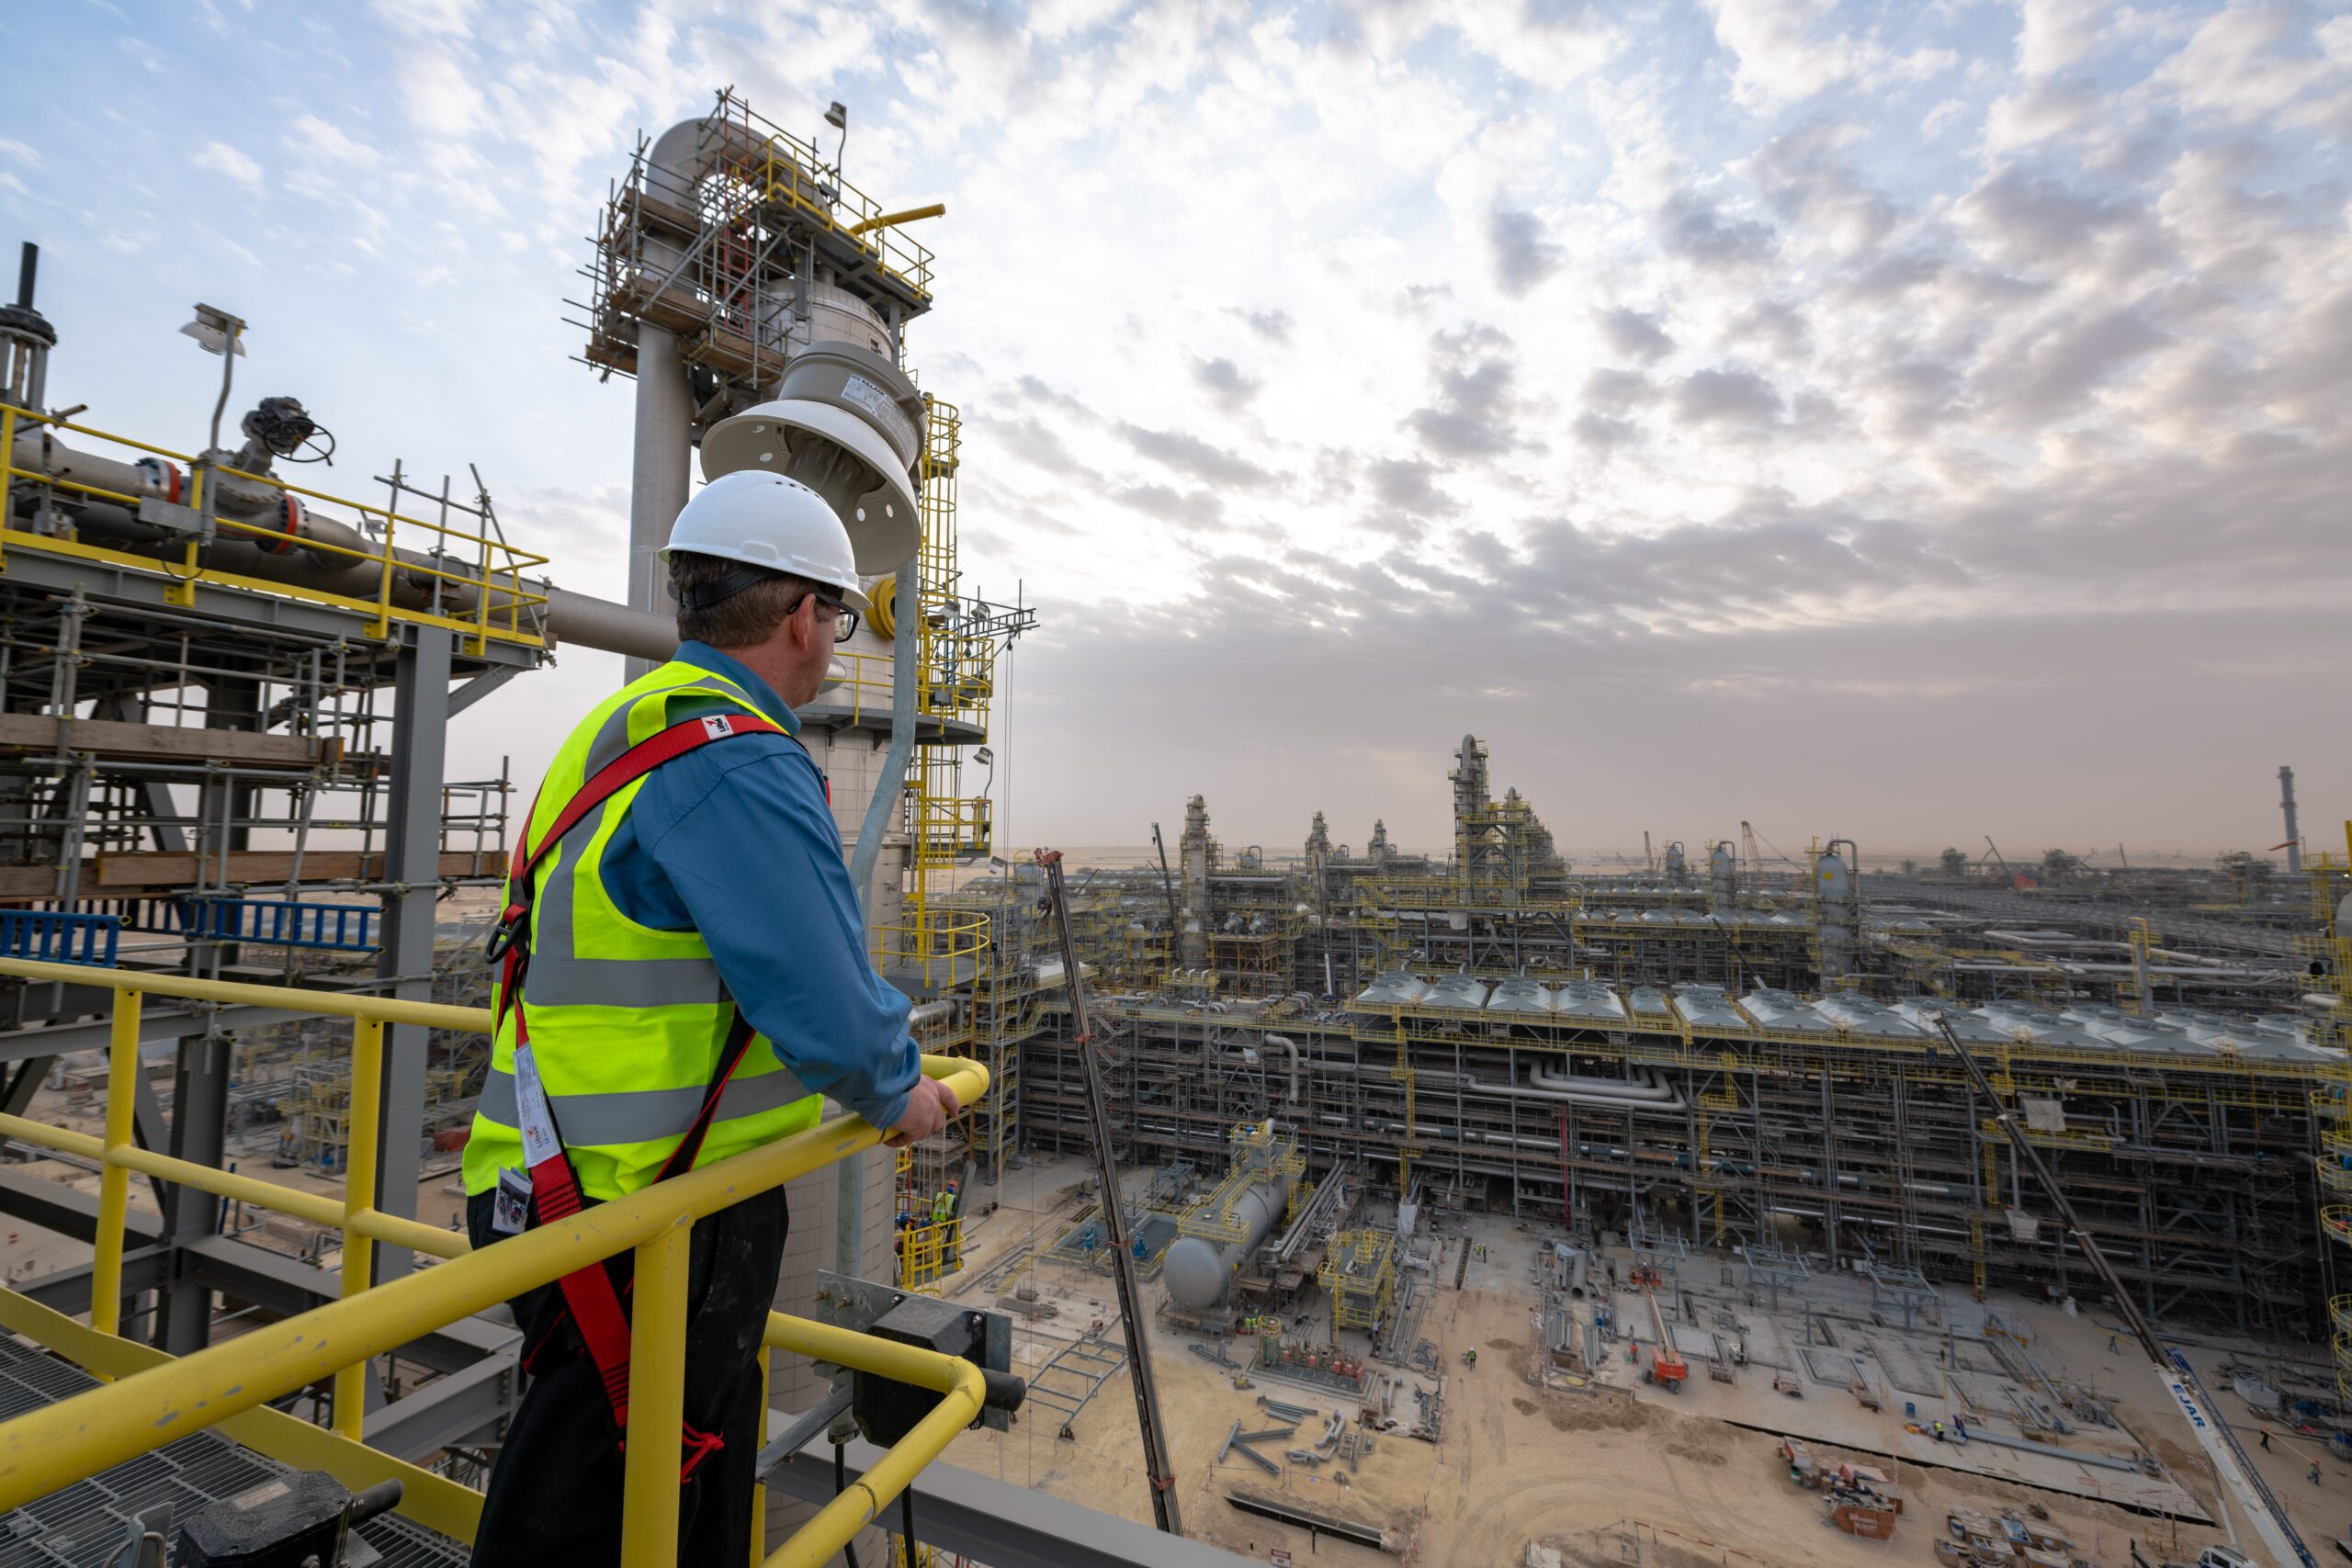 Aramco's Fadhili gas plant. The company announced the addition of 15 trillion cubic feet to its proven raw gas reserves